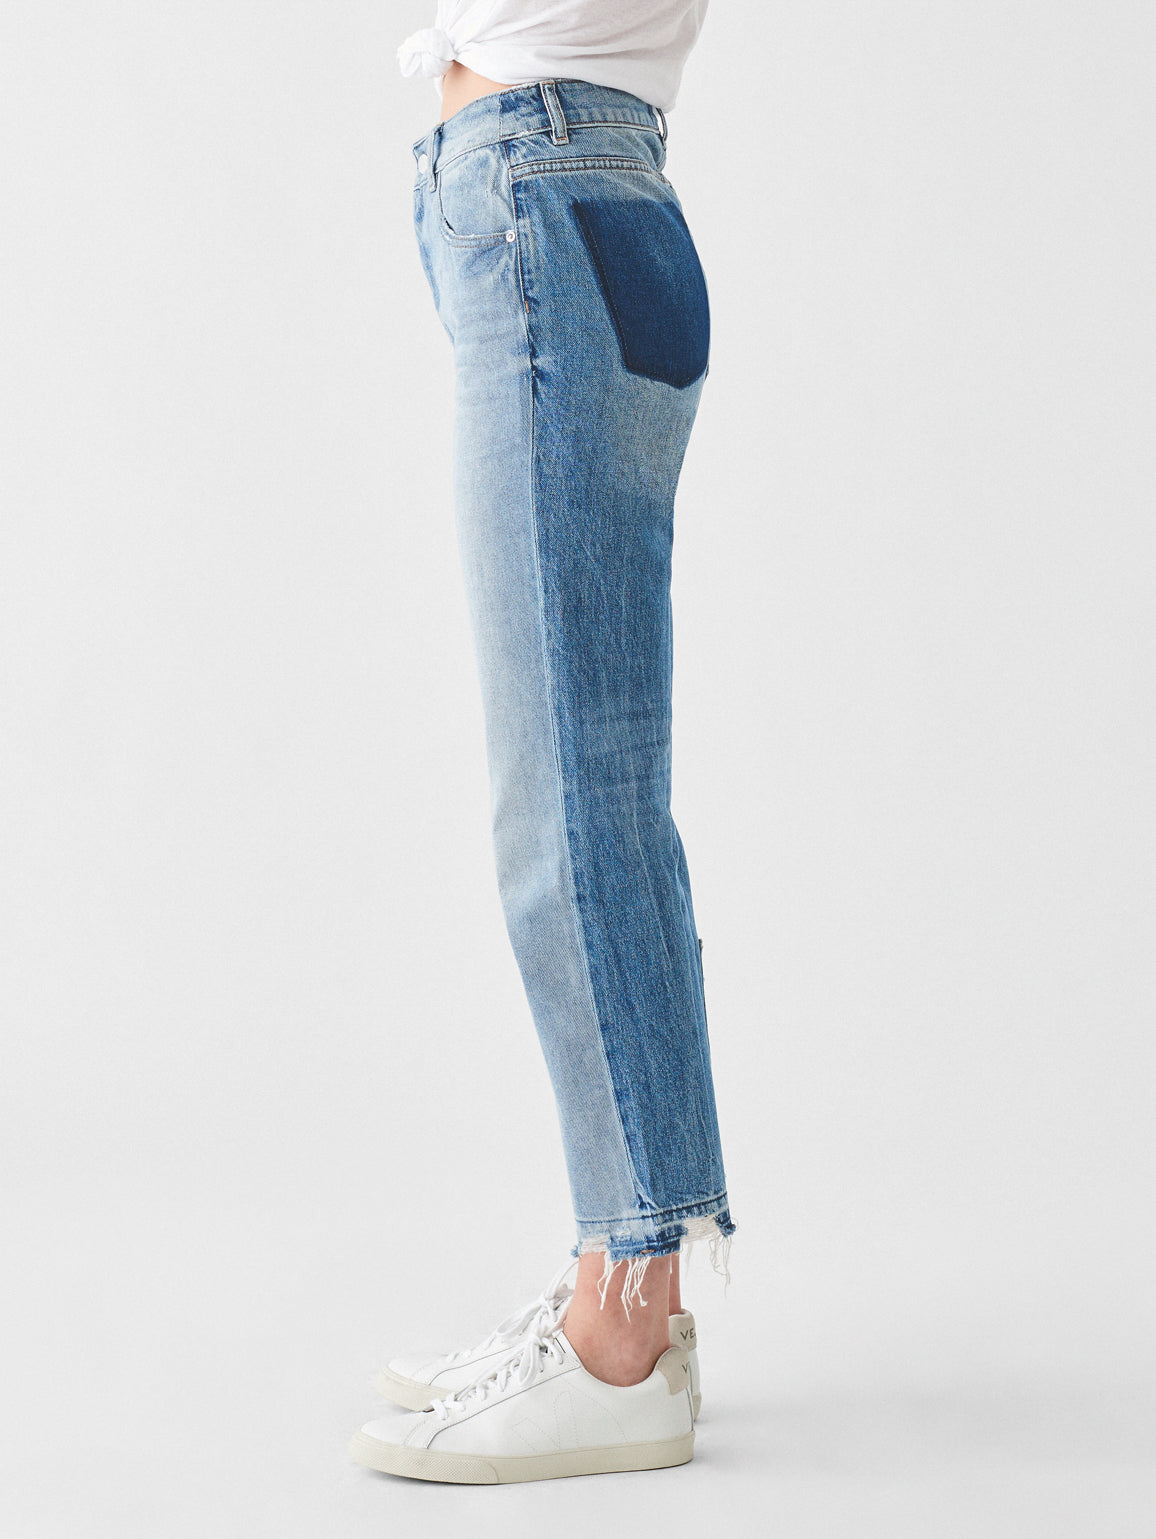 dl1961 jerry high rise jeans